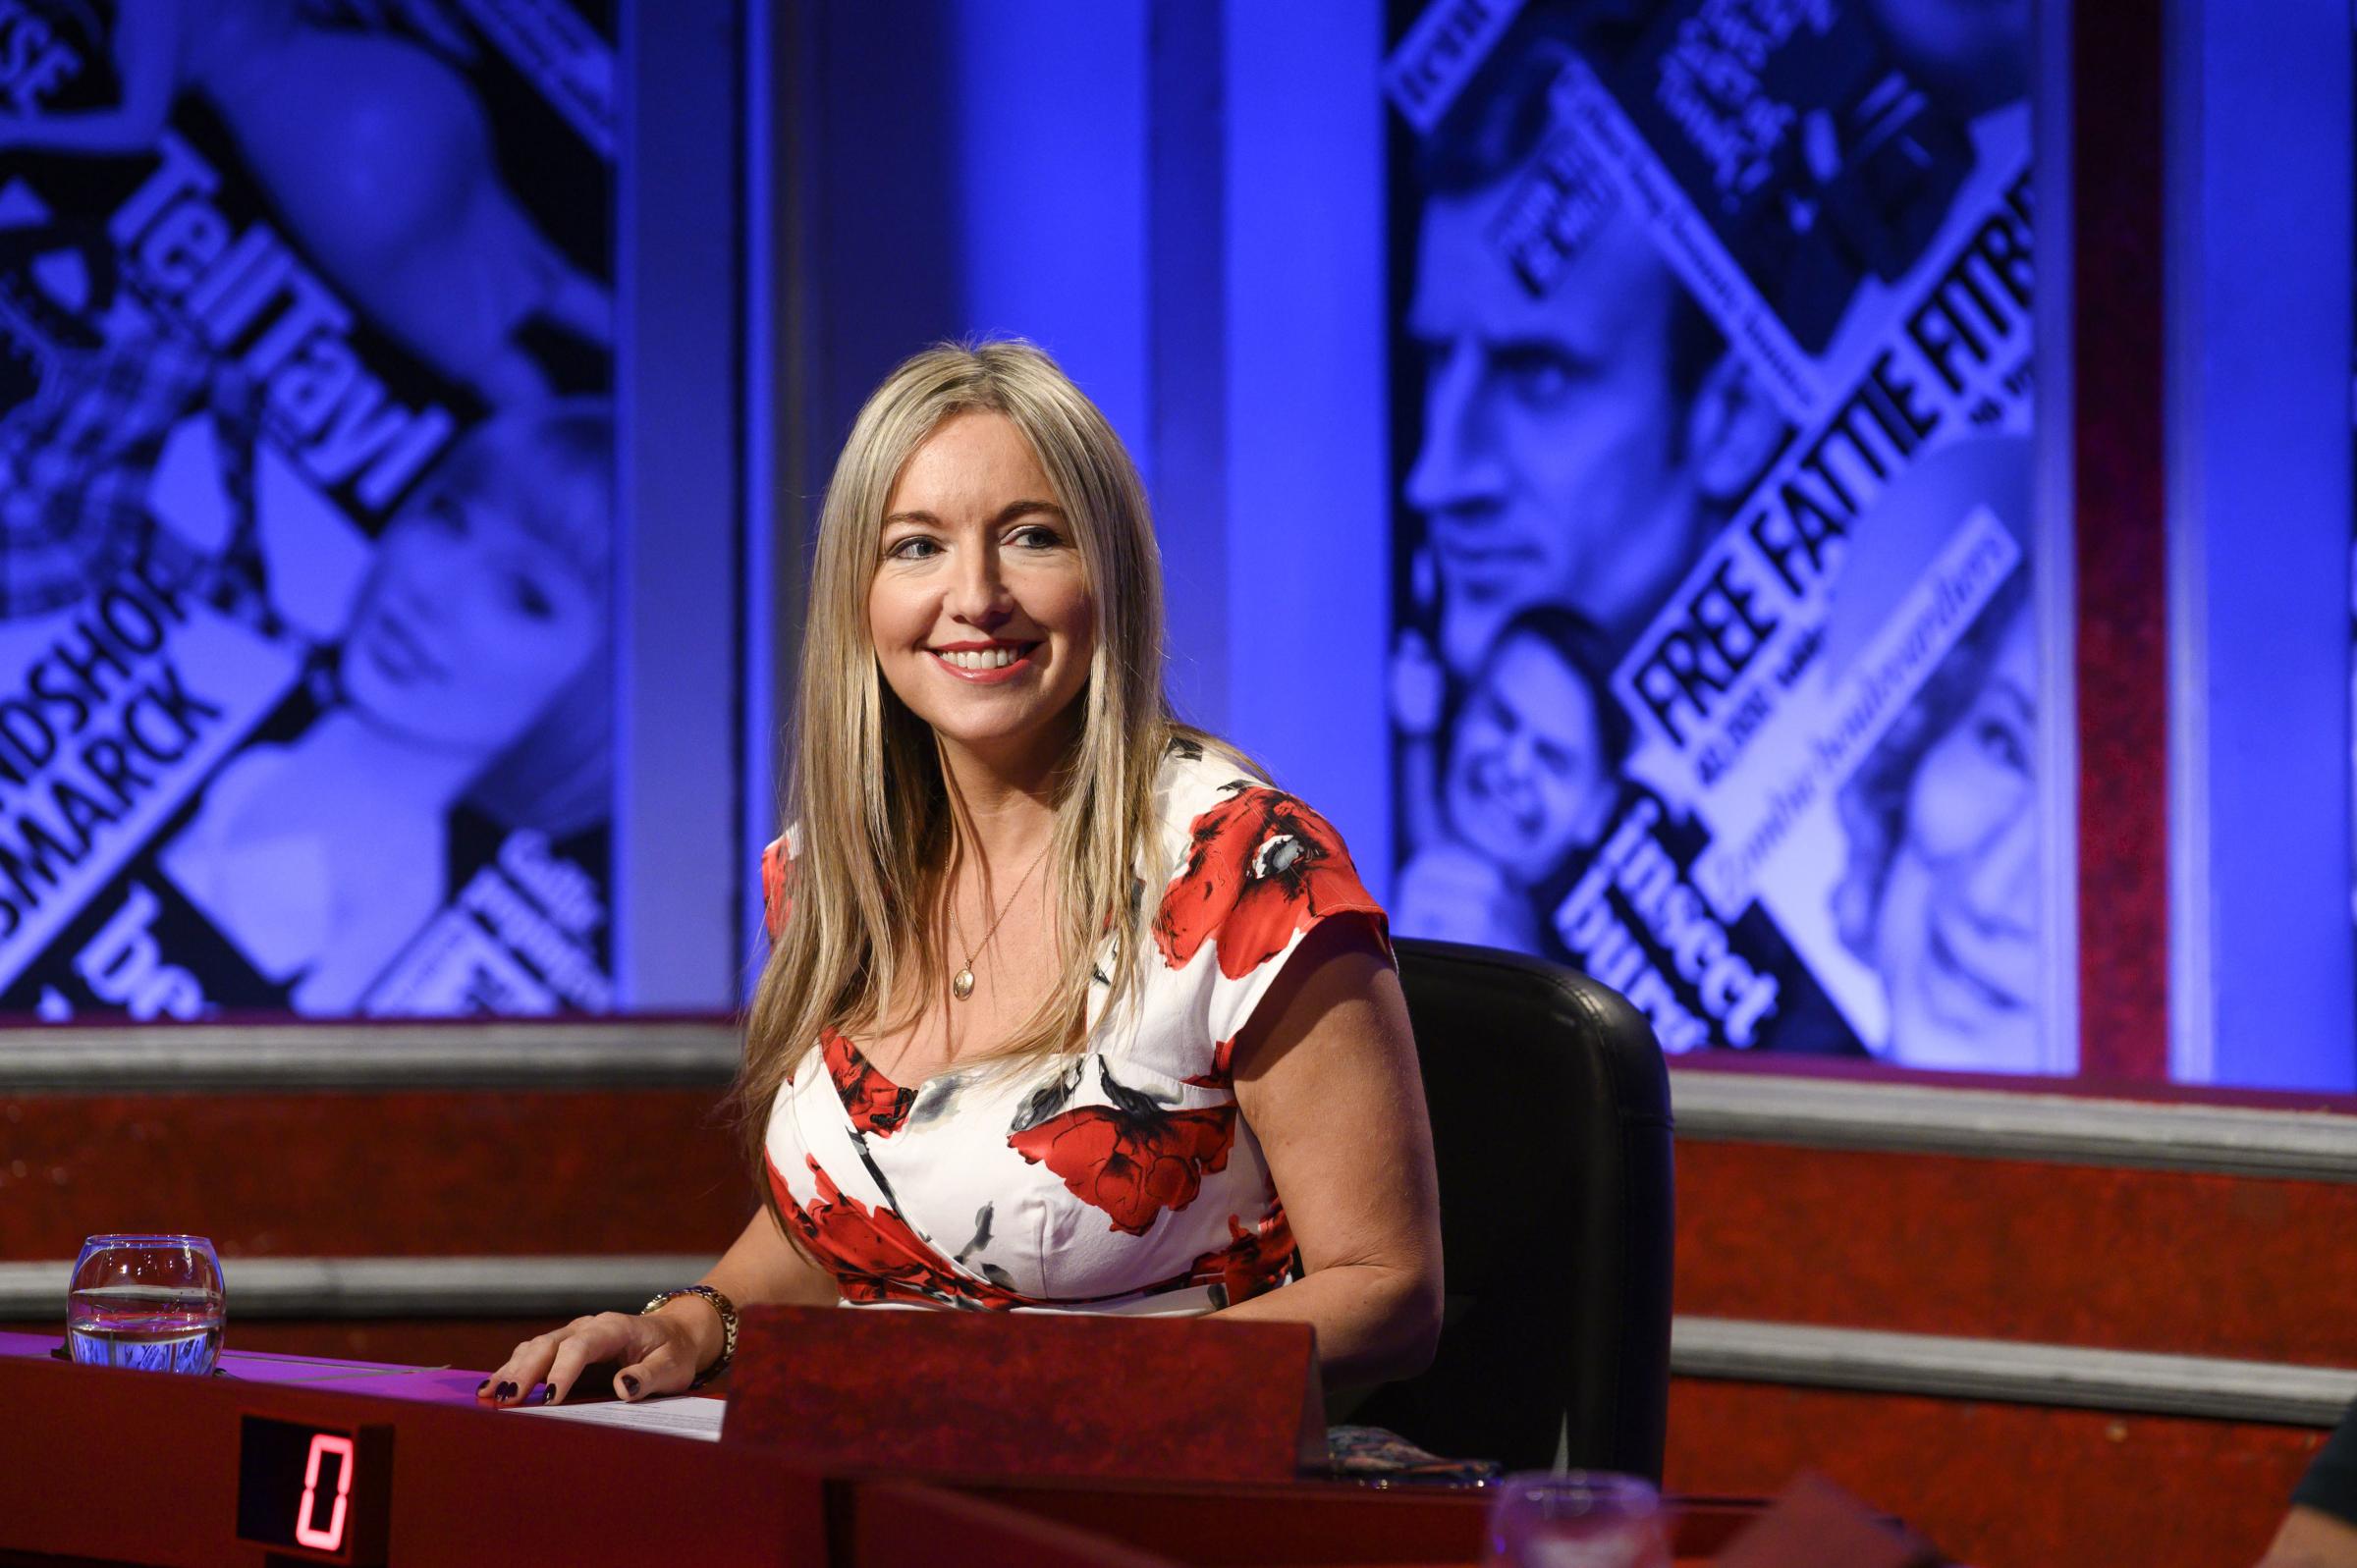 Have I Got News For You: Victoria Coren-Mitchell